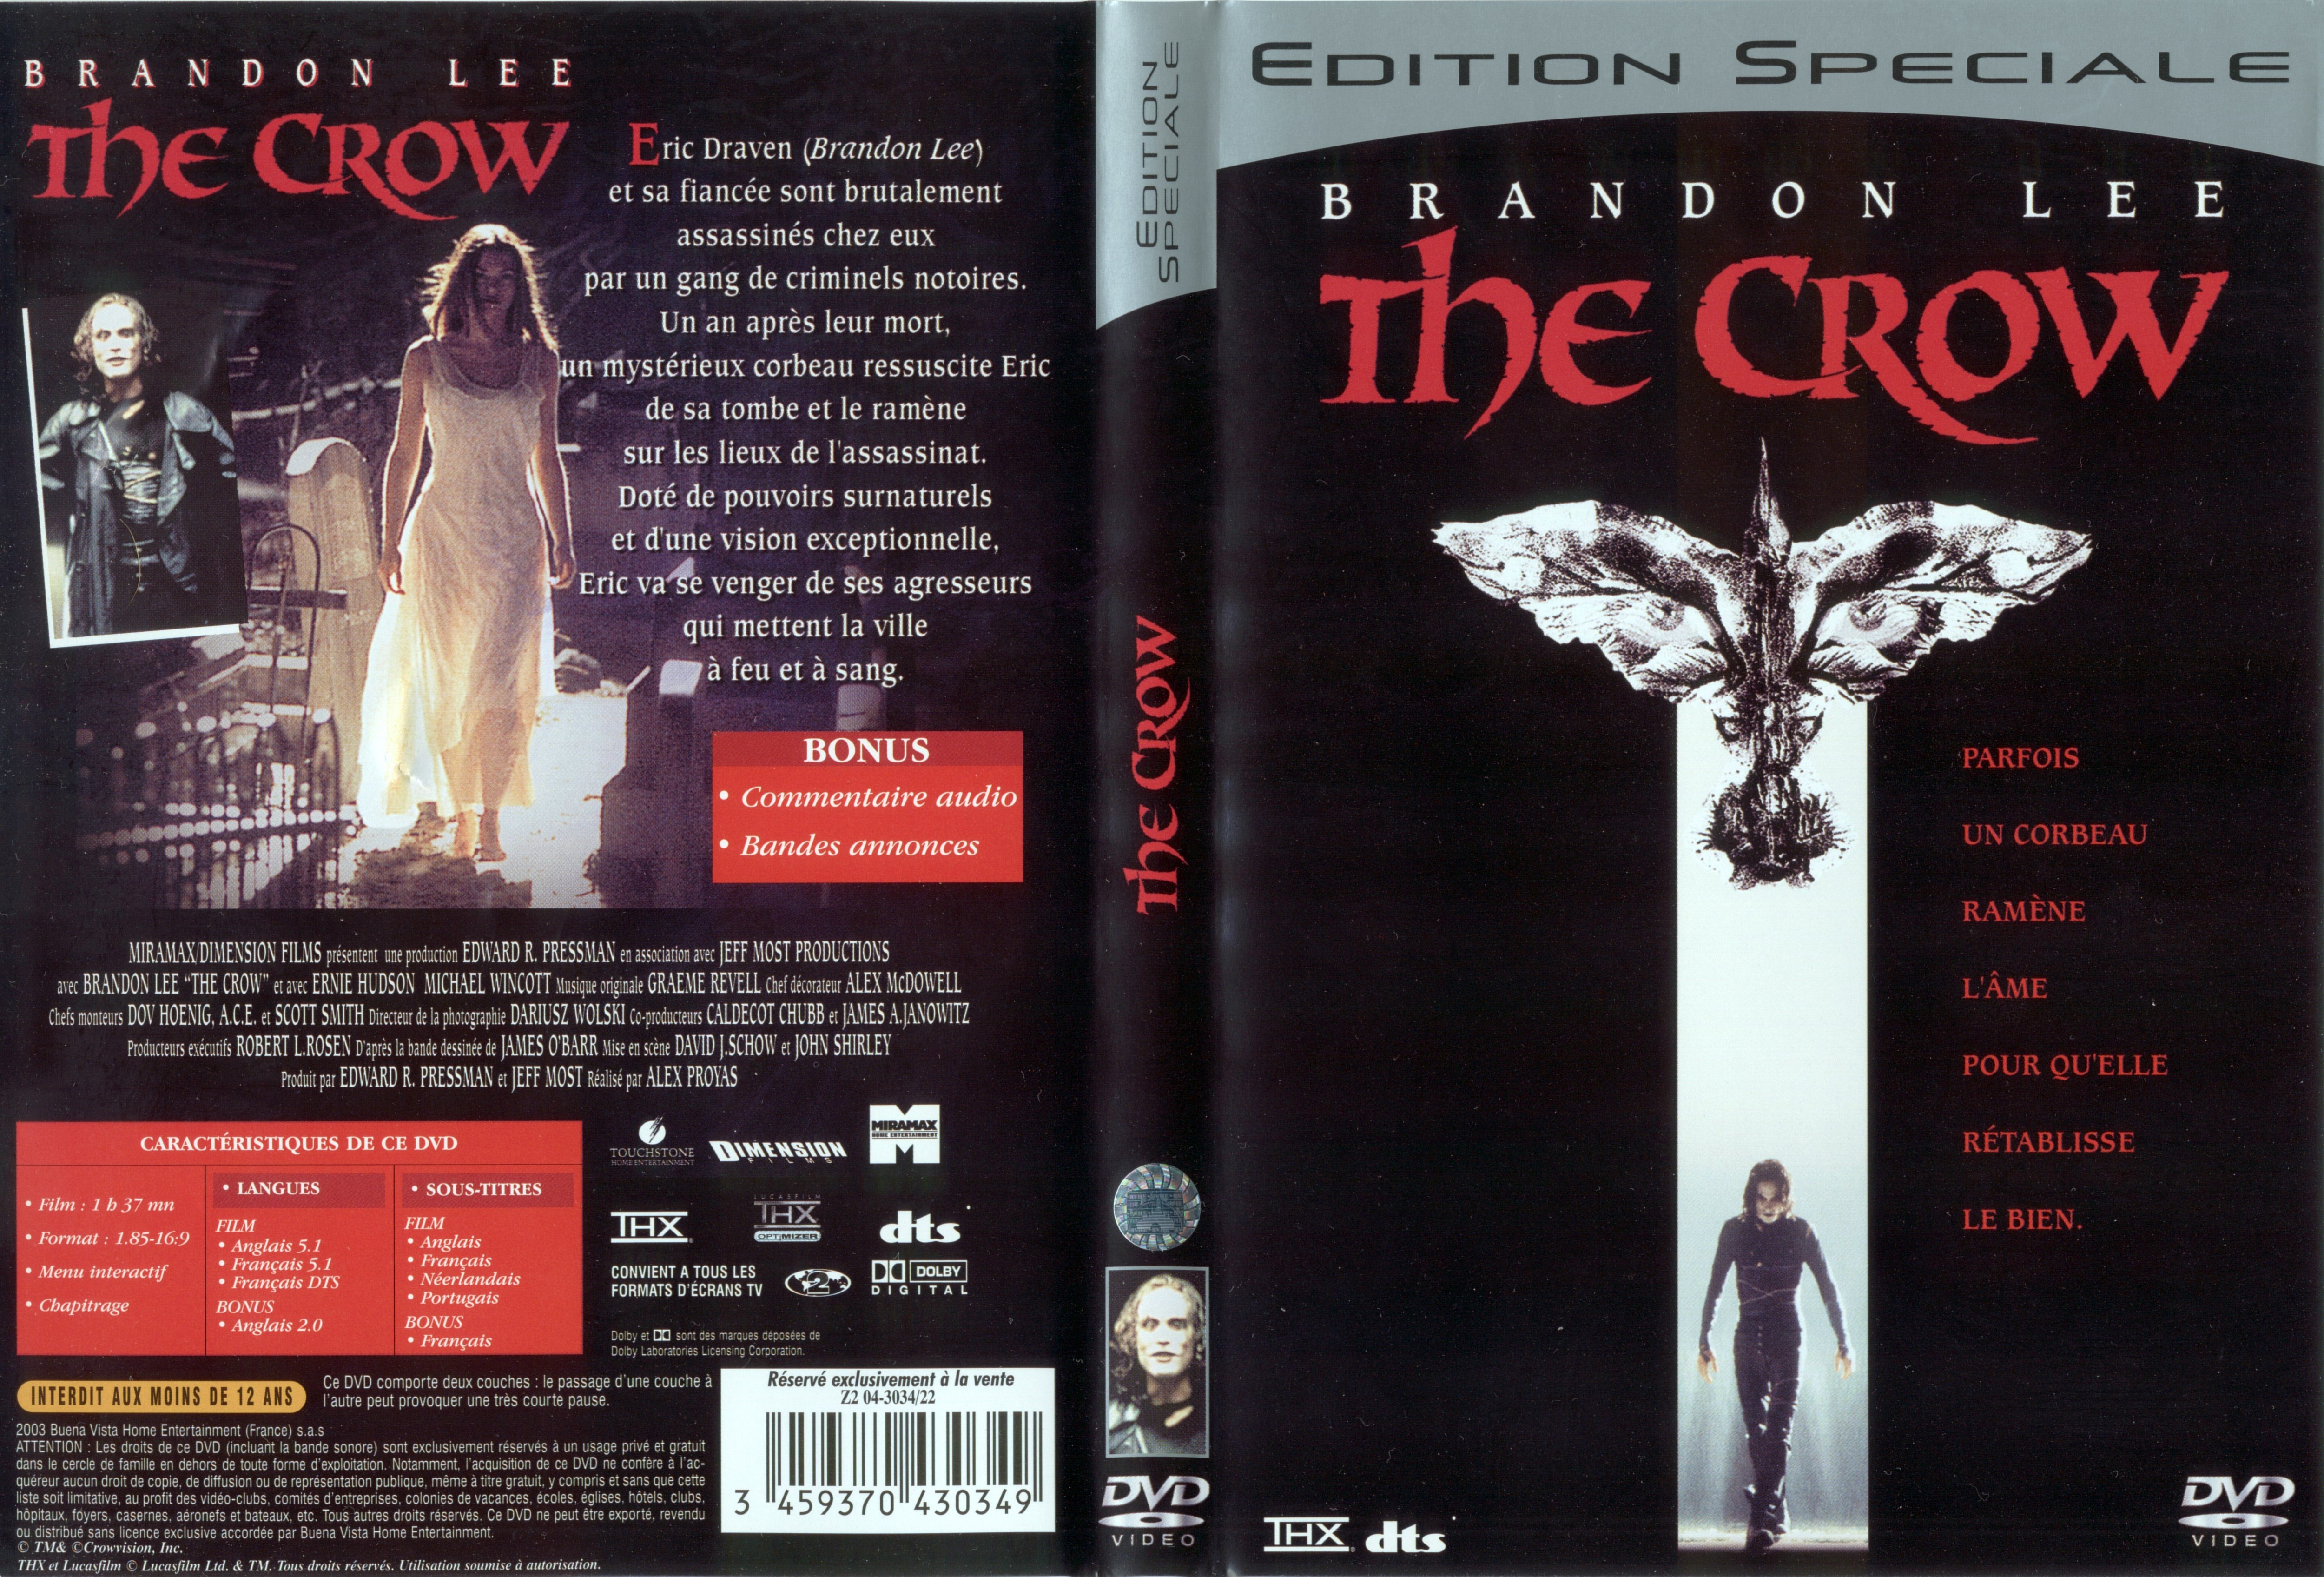 Jaquette DVD The crow